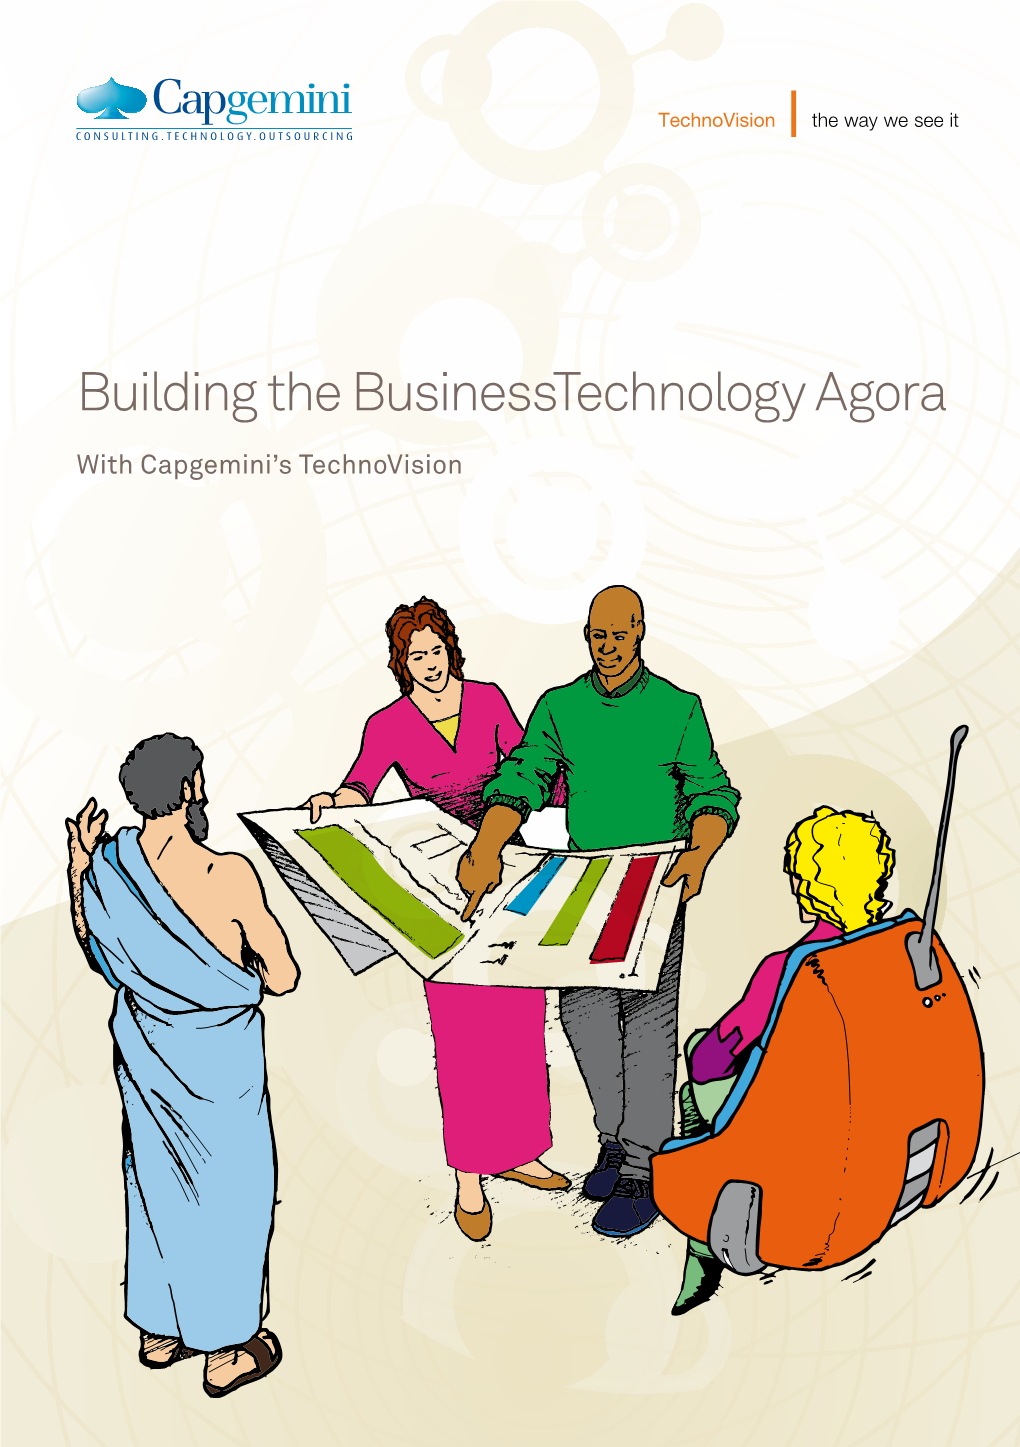 Building the Businesstechnology Agora